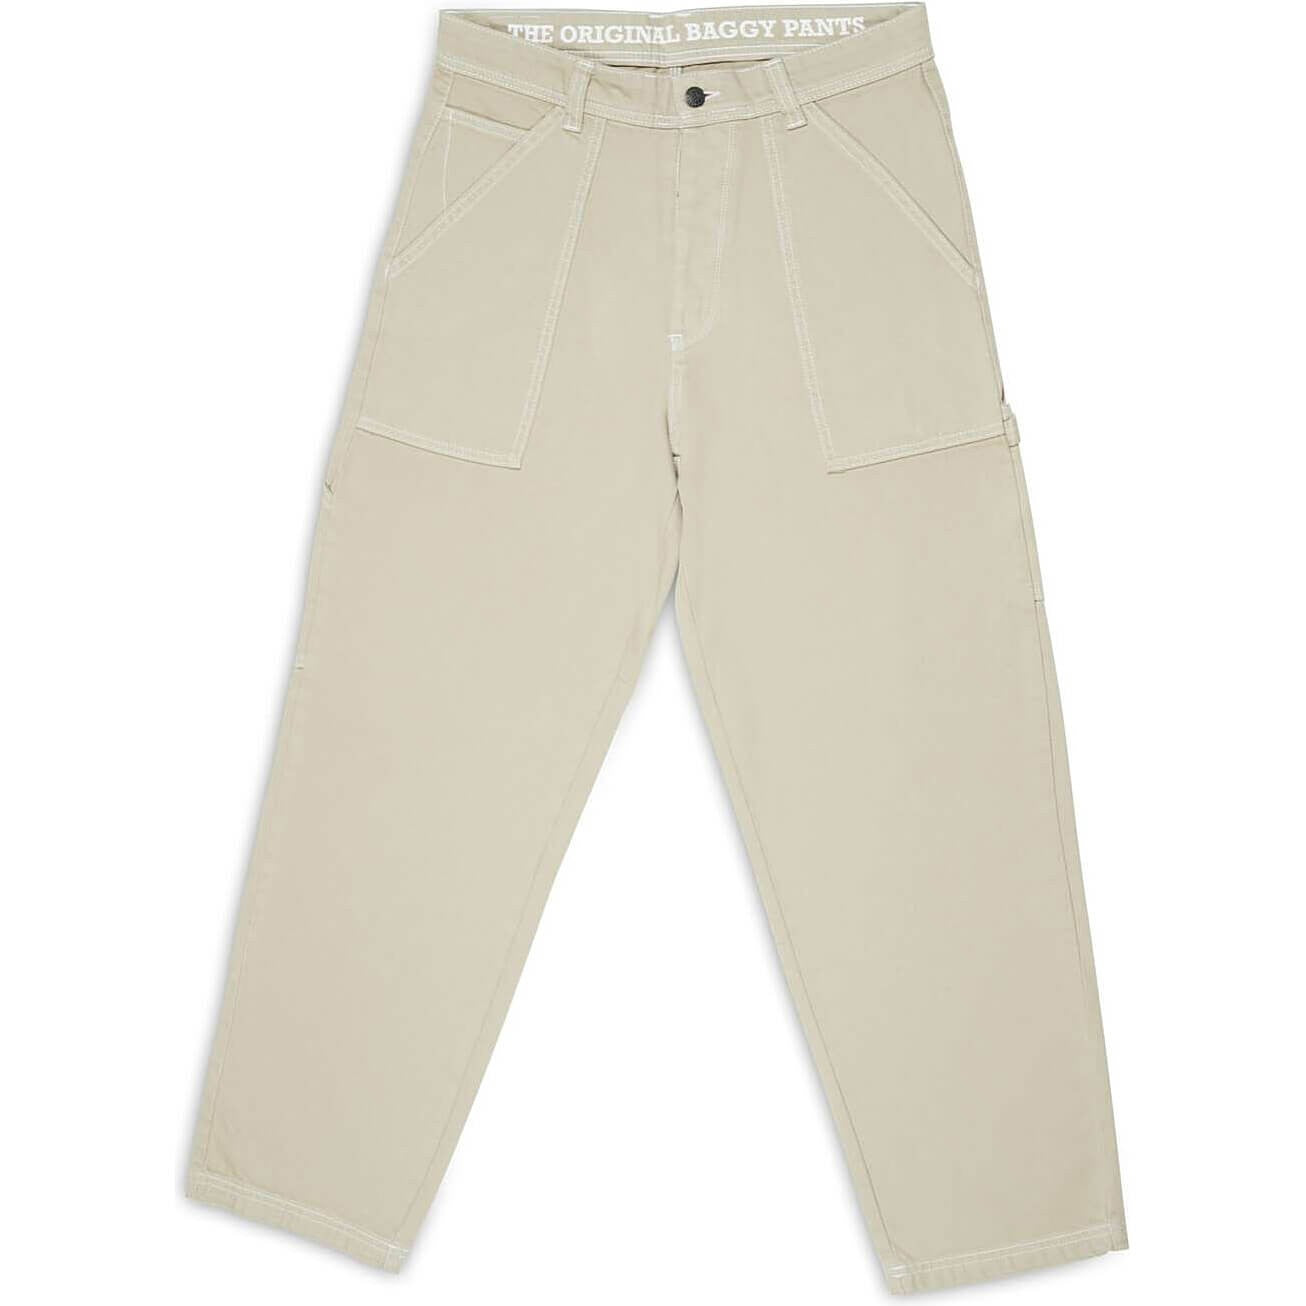 HOMEBOY x-tra WORK PANT SAND